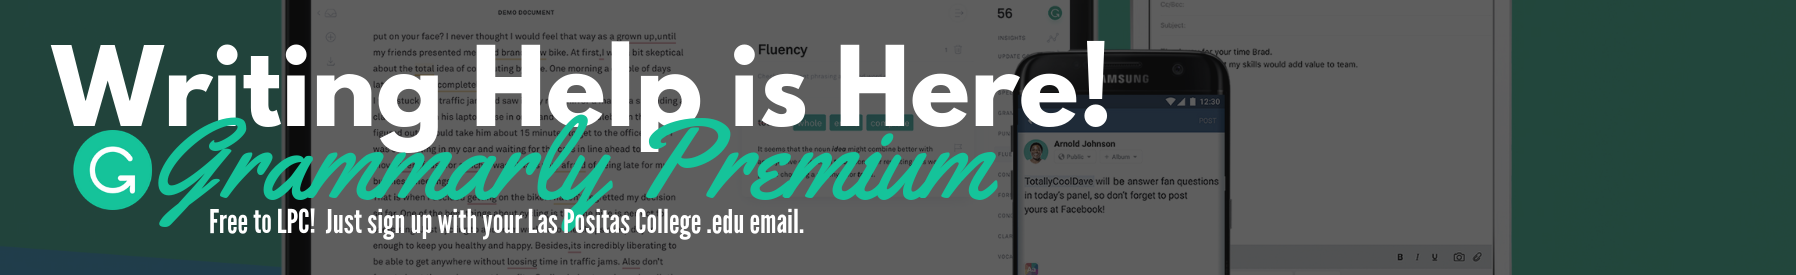 Writing Help is Here!  Get Grammarly Premium free through LPC.  Just sign up with your .edu email.